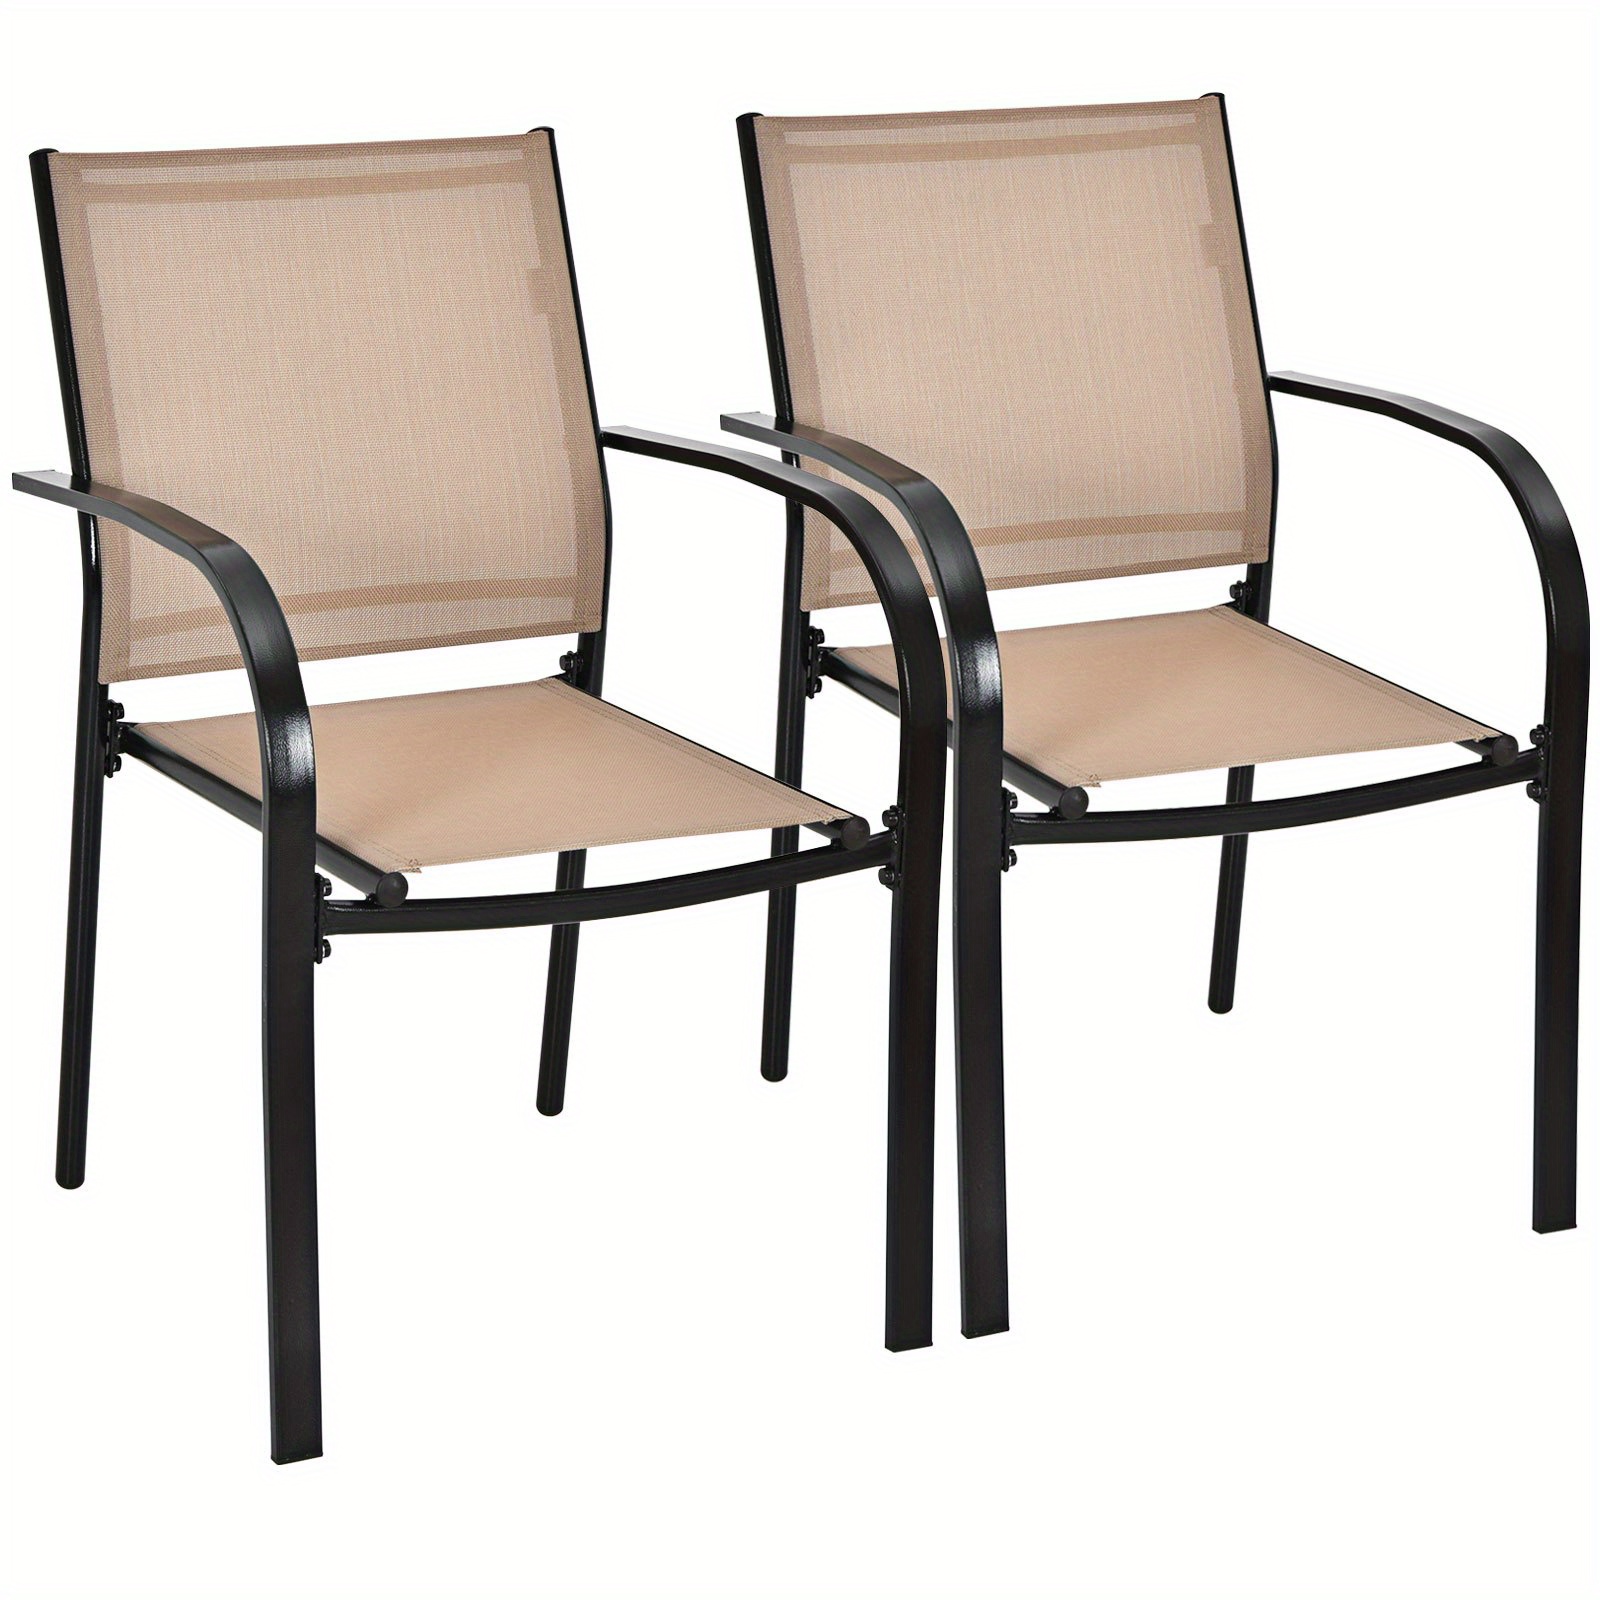 

Safstar Set Of 2 Patio Dining Chairs Stackable With Armrests Garden Deck Brown